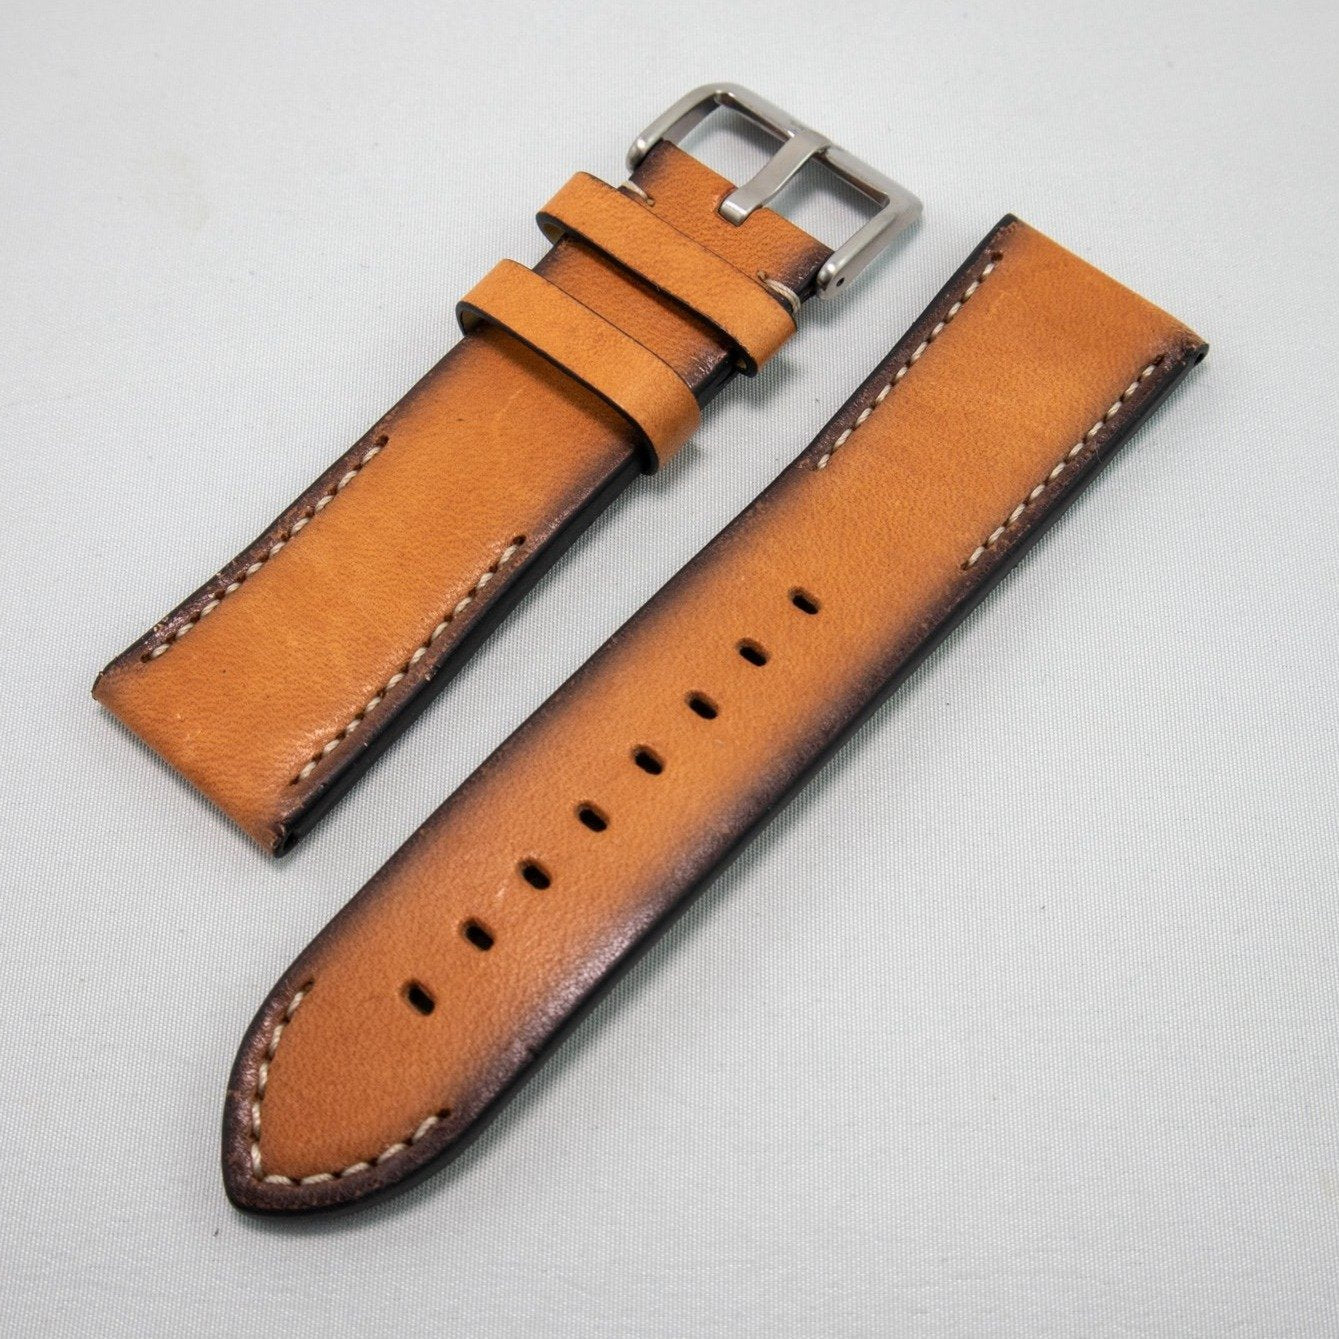 Alpine Watchstrap - Hand painted Leather /